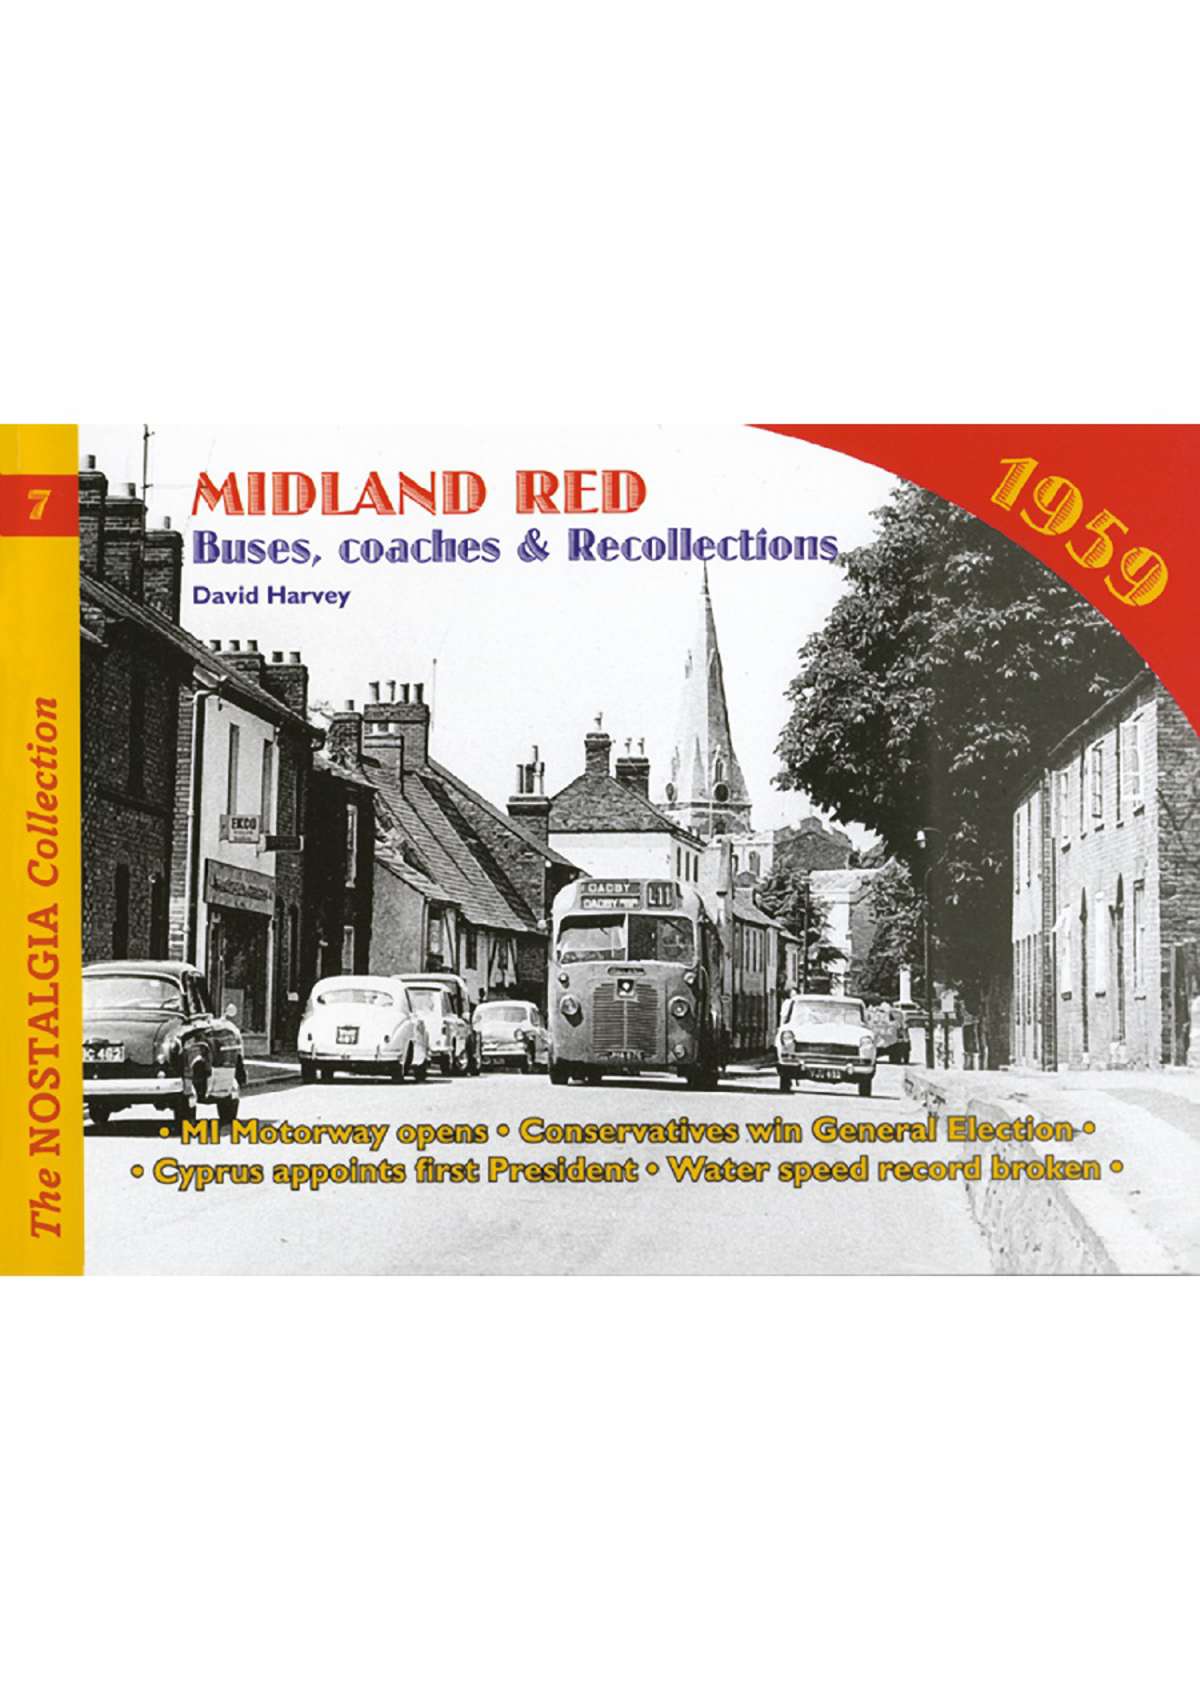 3016 - Vol 07: Buses, Coaches & Recollections: Midland Red